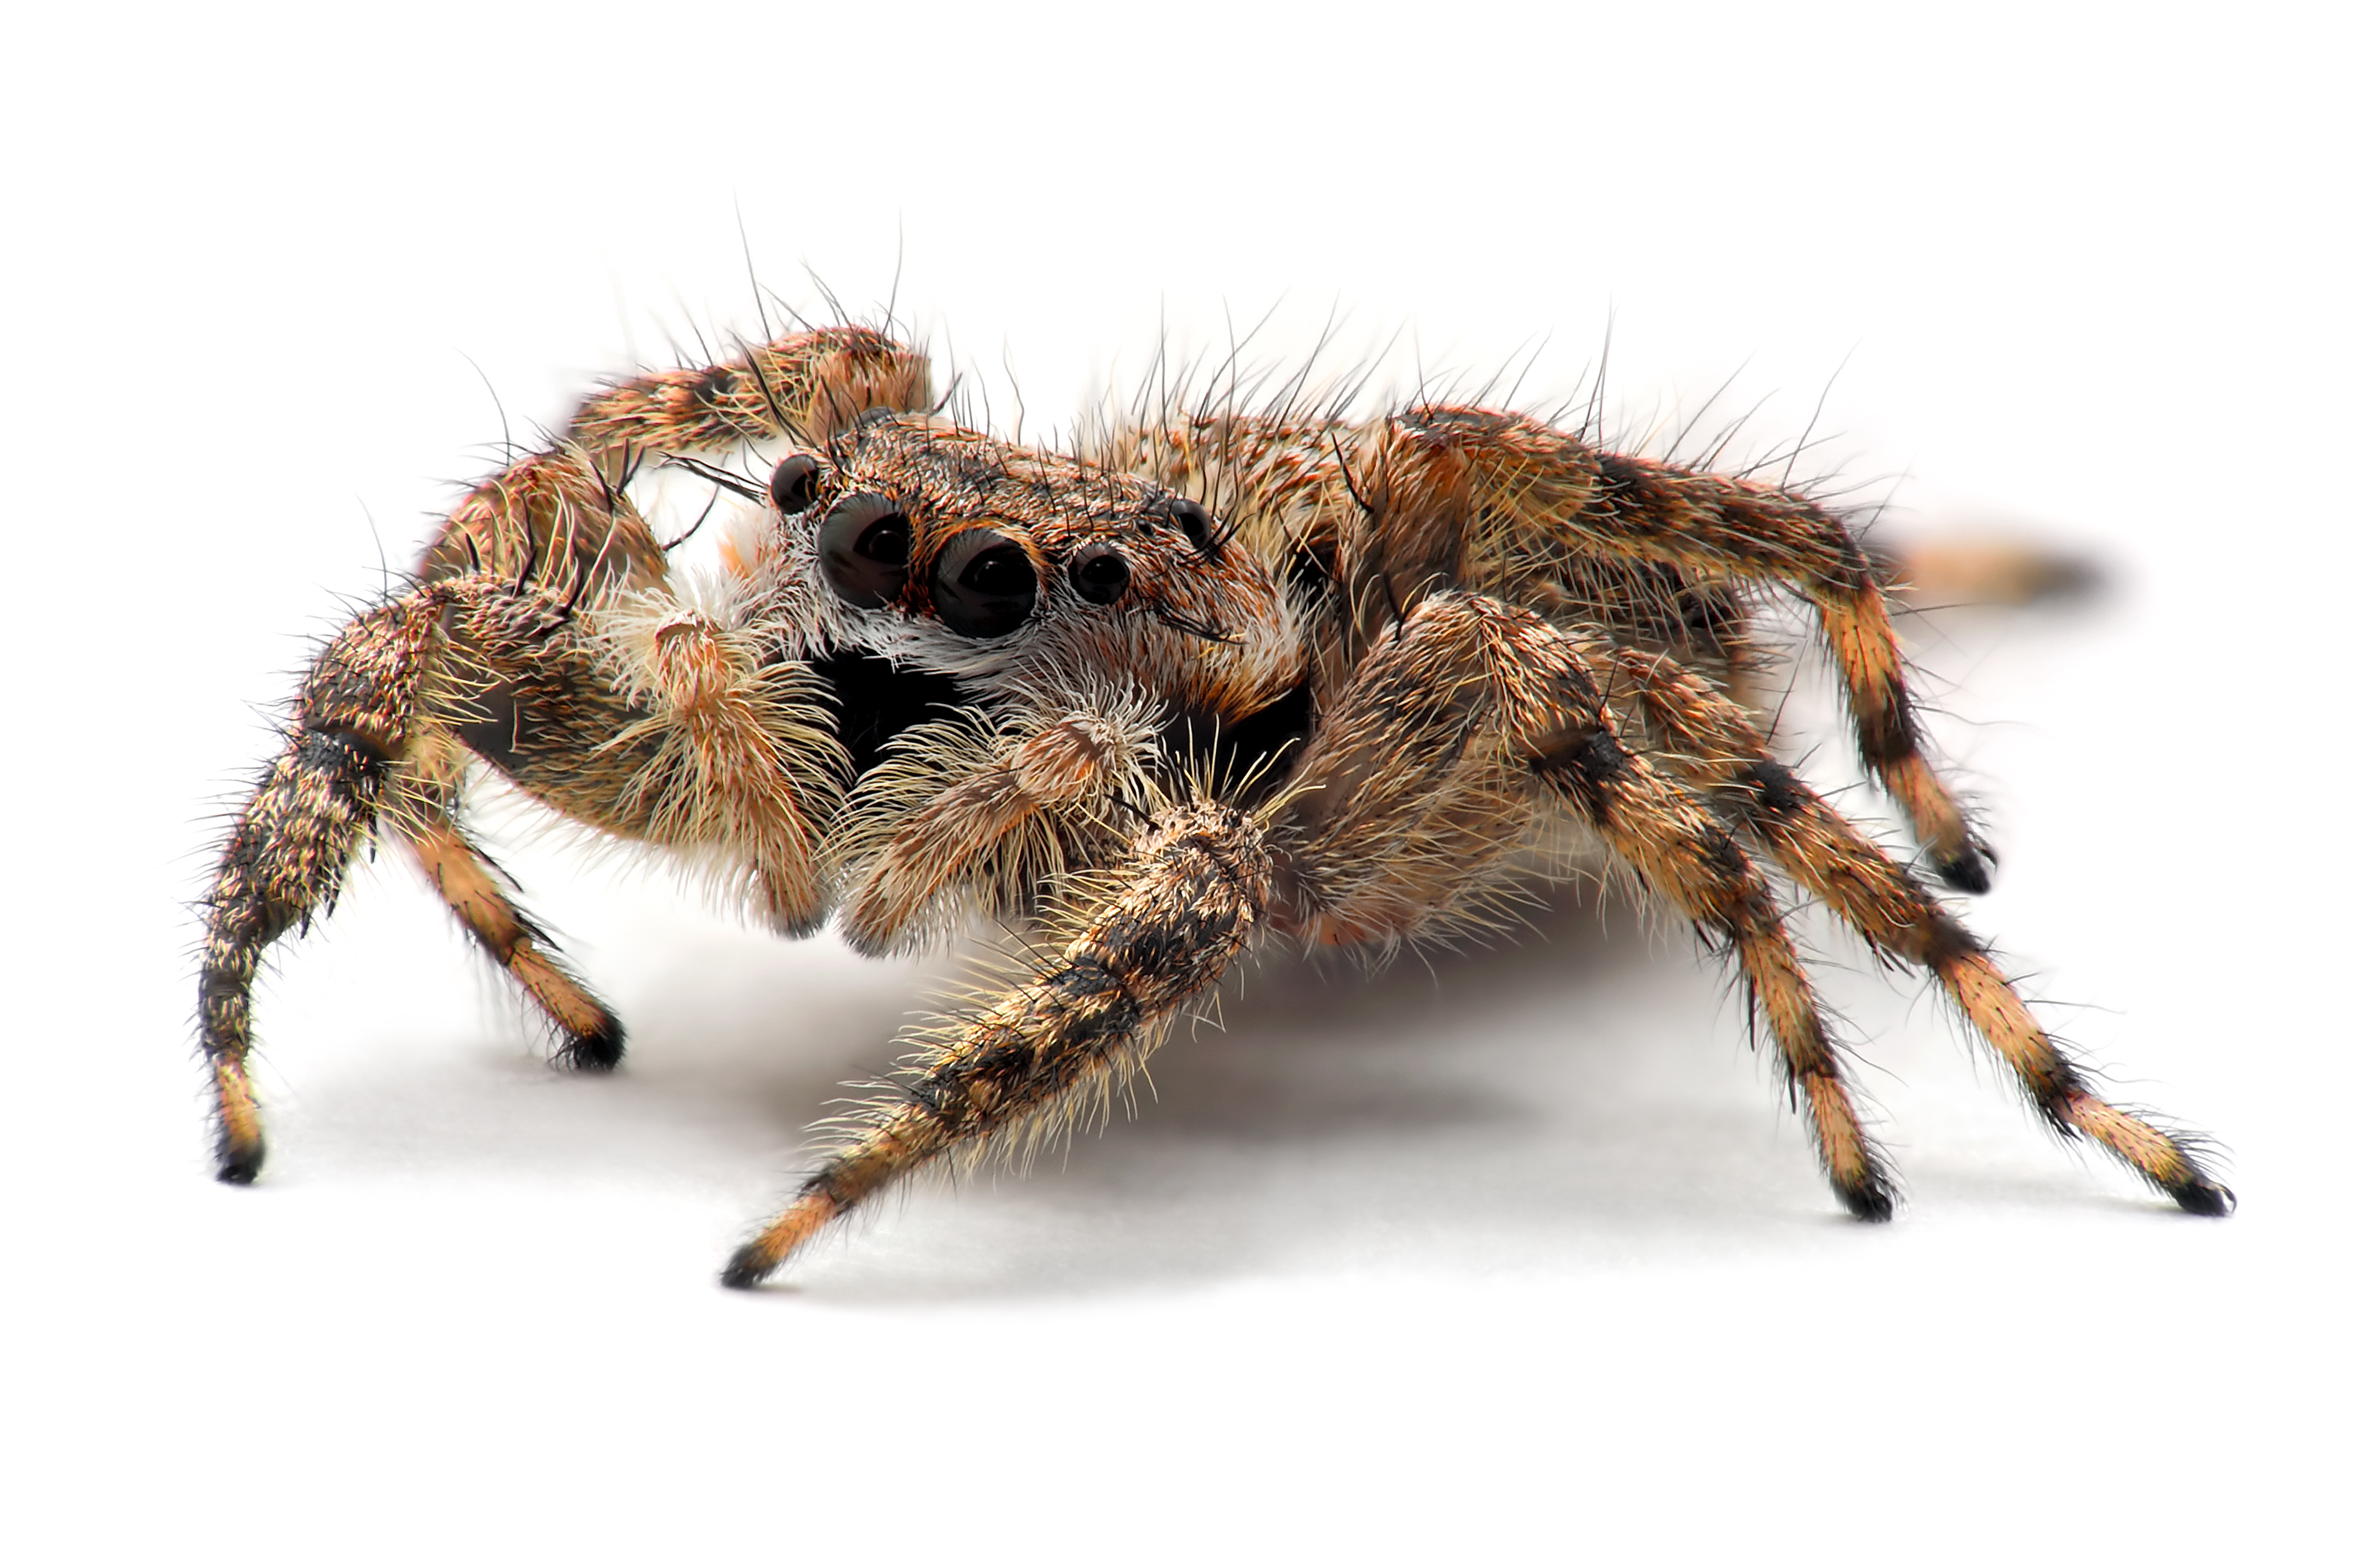 Do all jumping spiders get big?